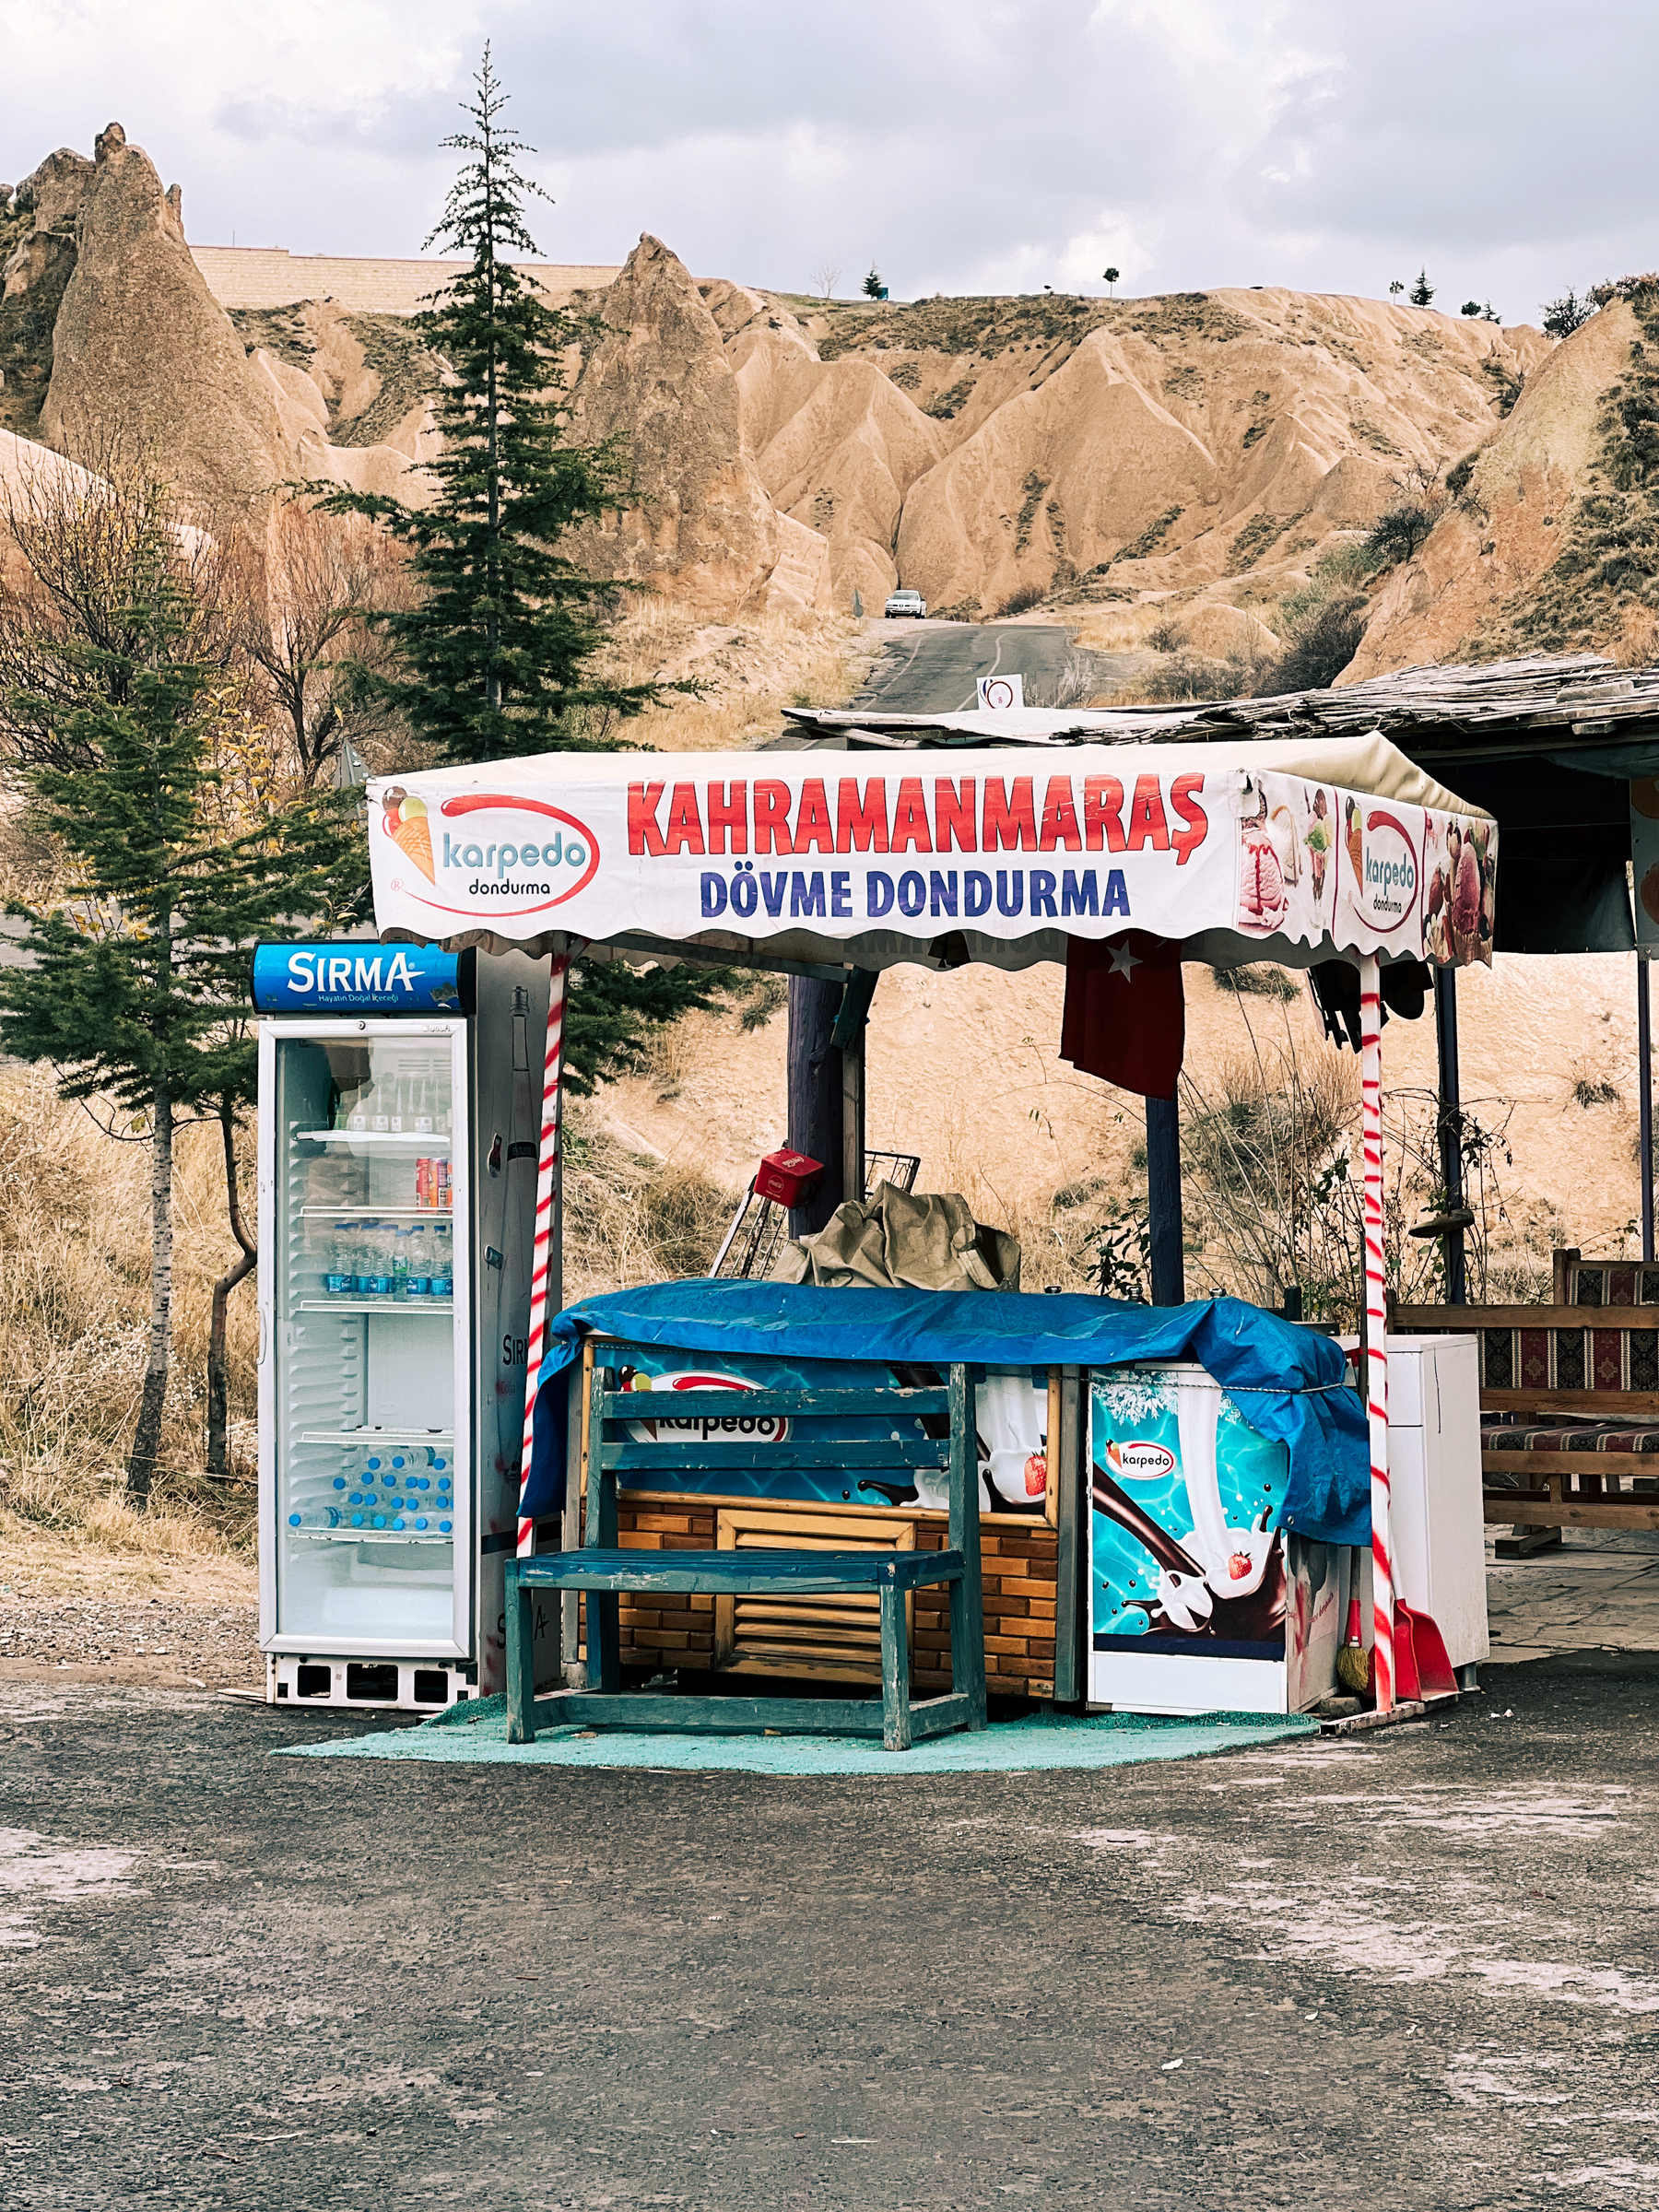 An abandoned ice-cream stand in the middle of nowhere.